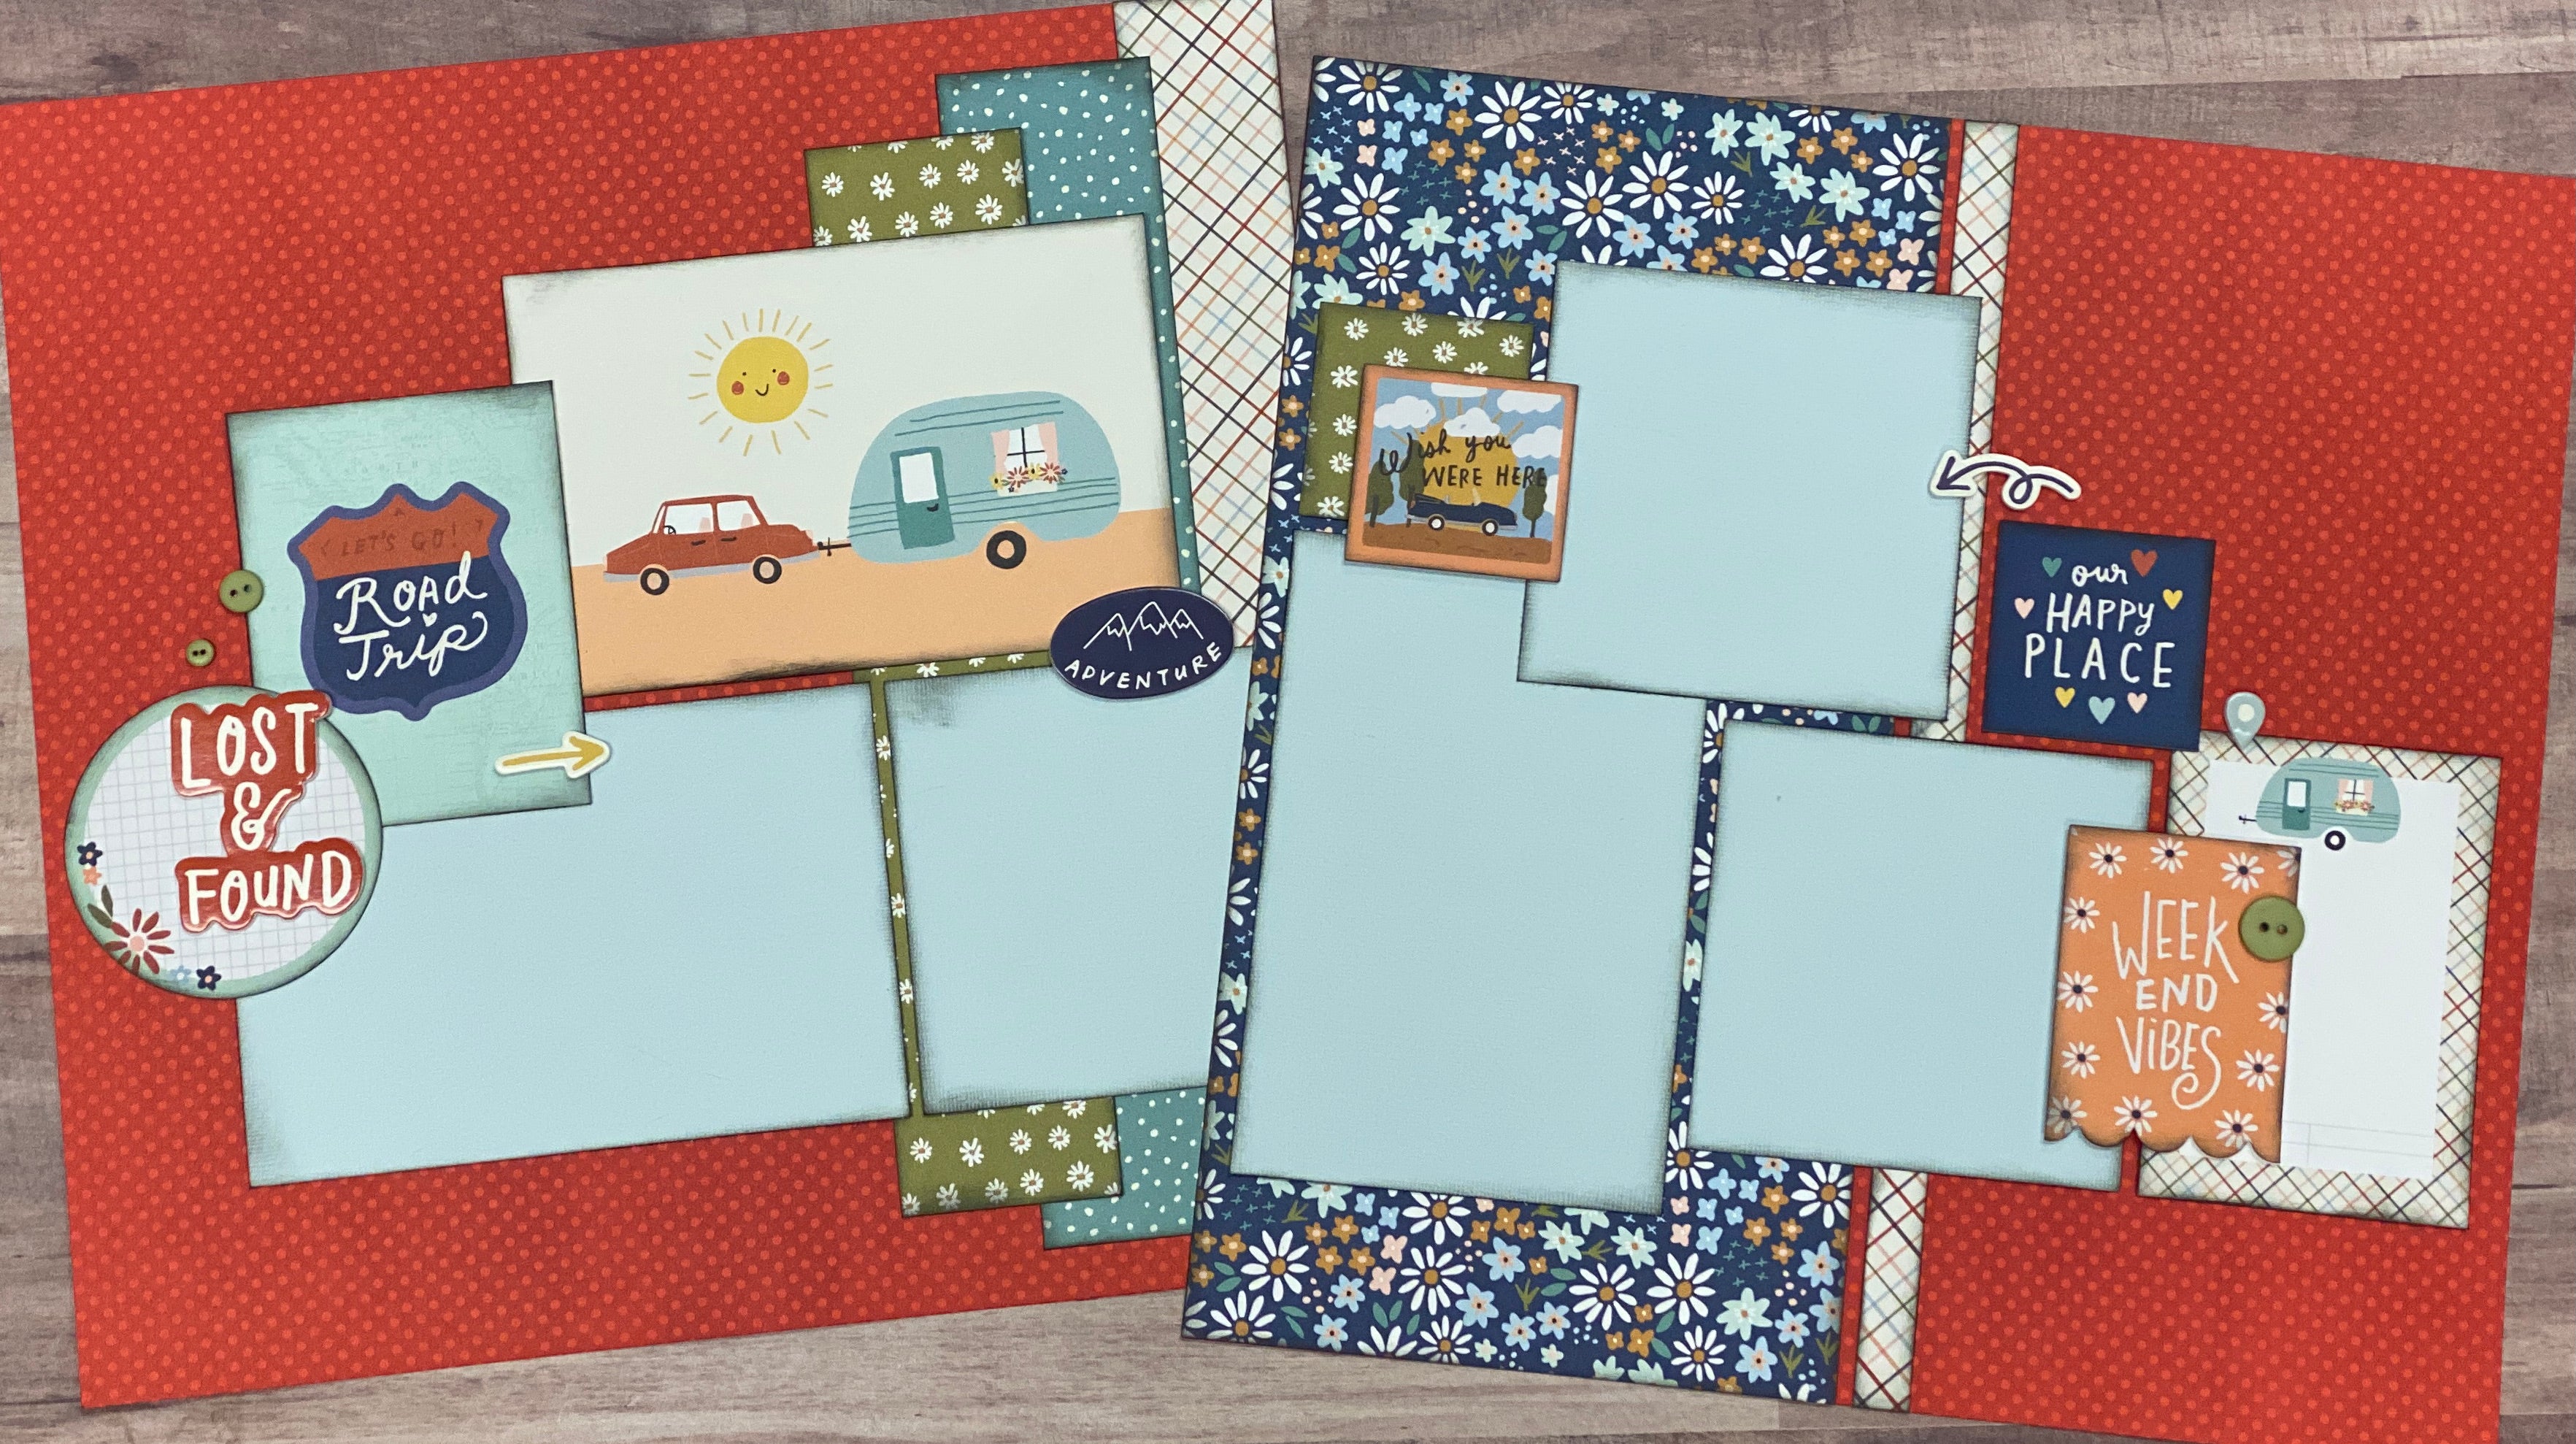 How To Make A DIY Travel Scrapbook Kit - Scrapbook While On